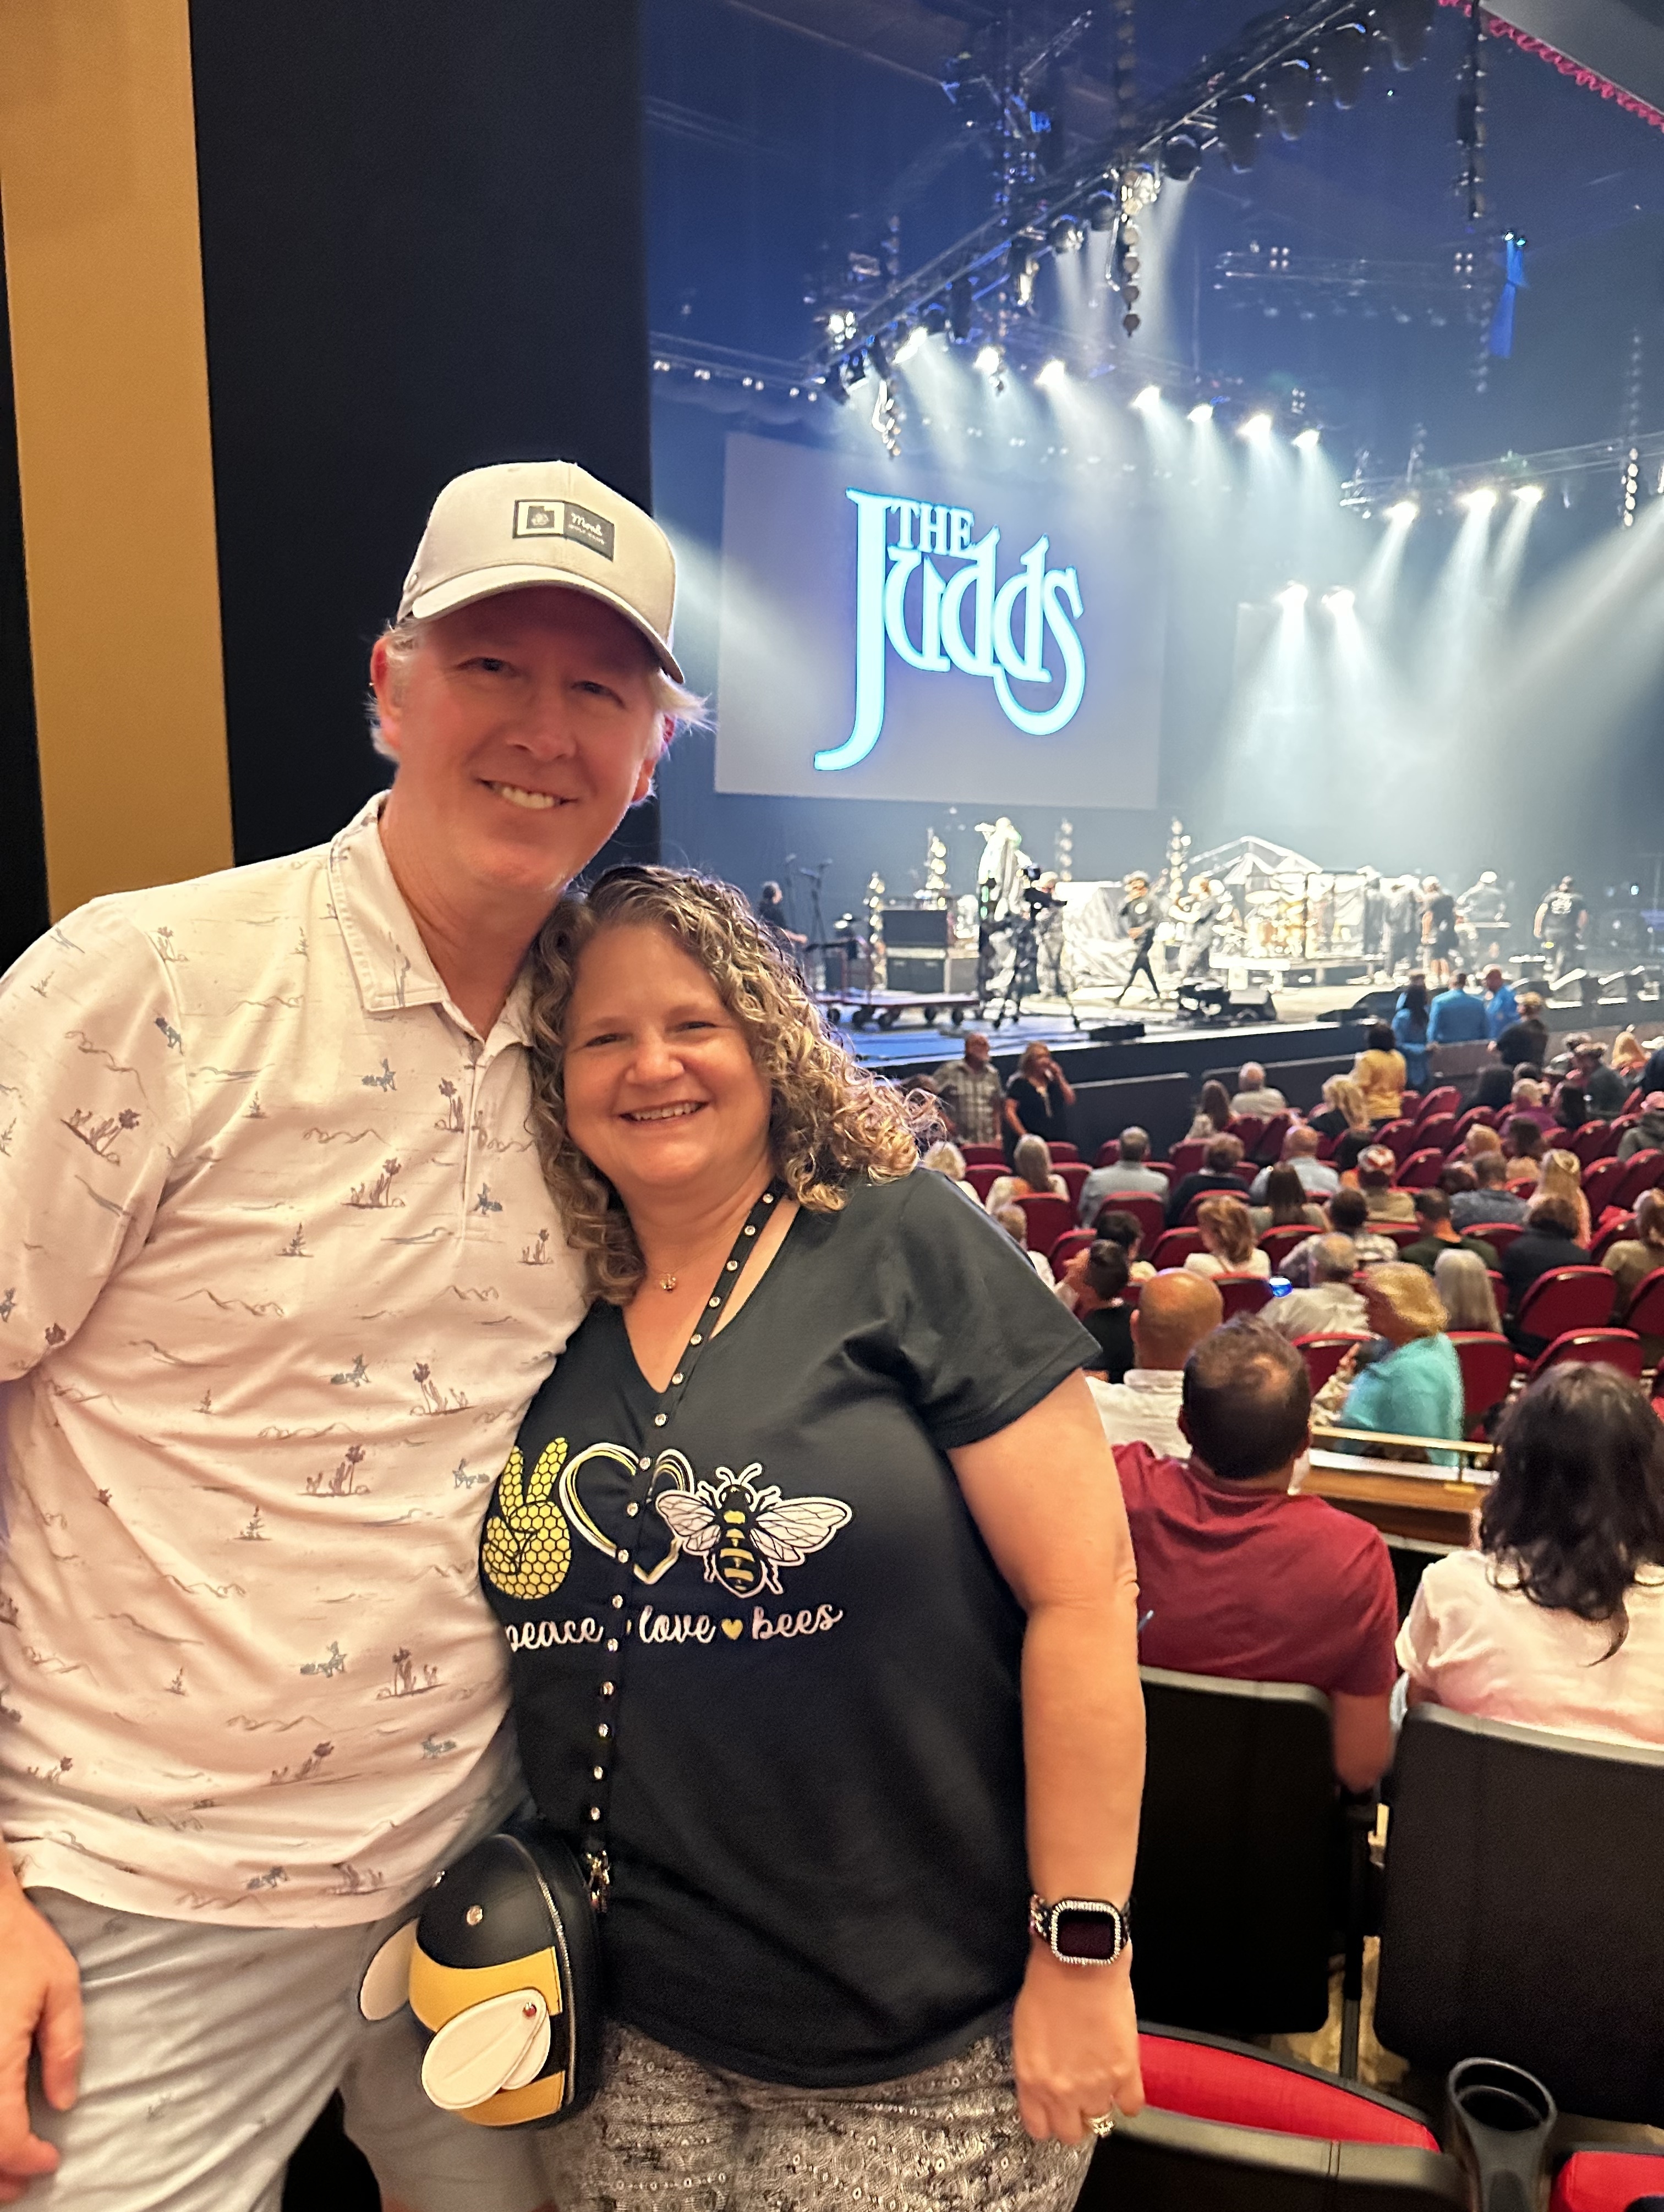 The Judds: the Final Tour